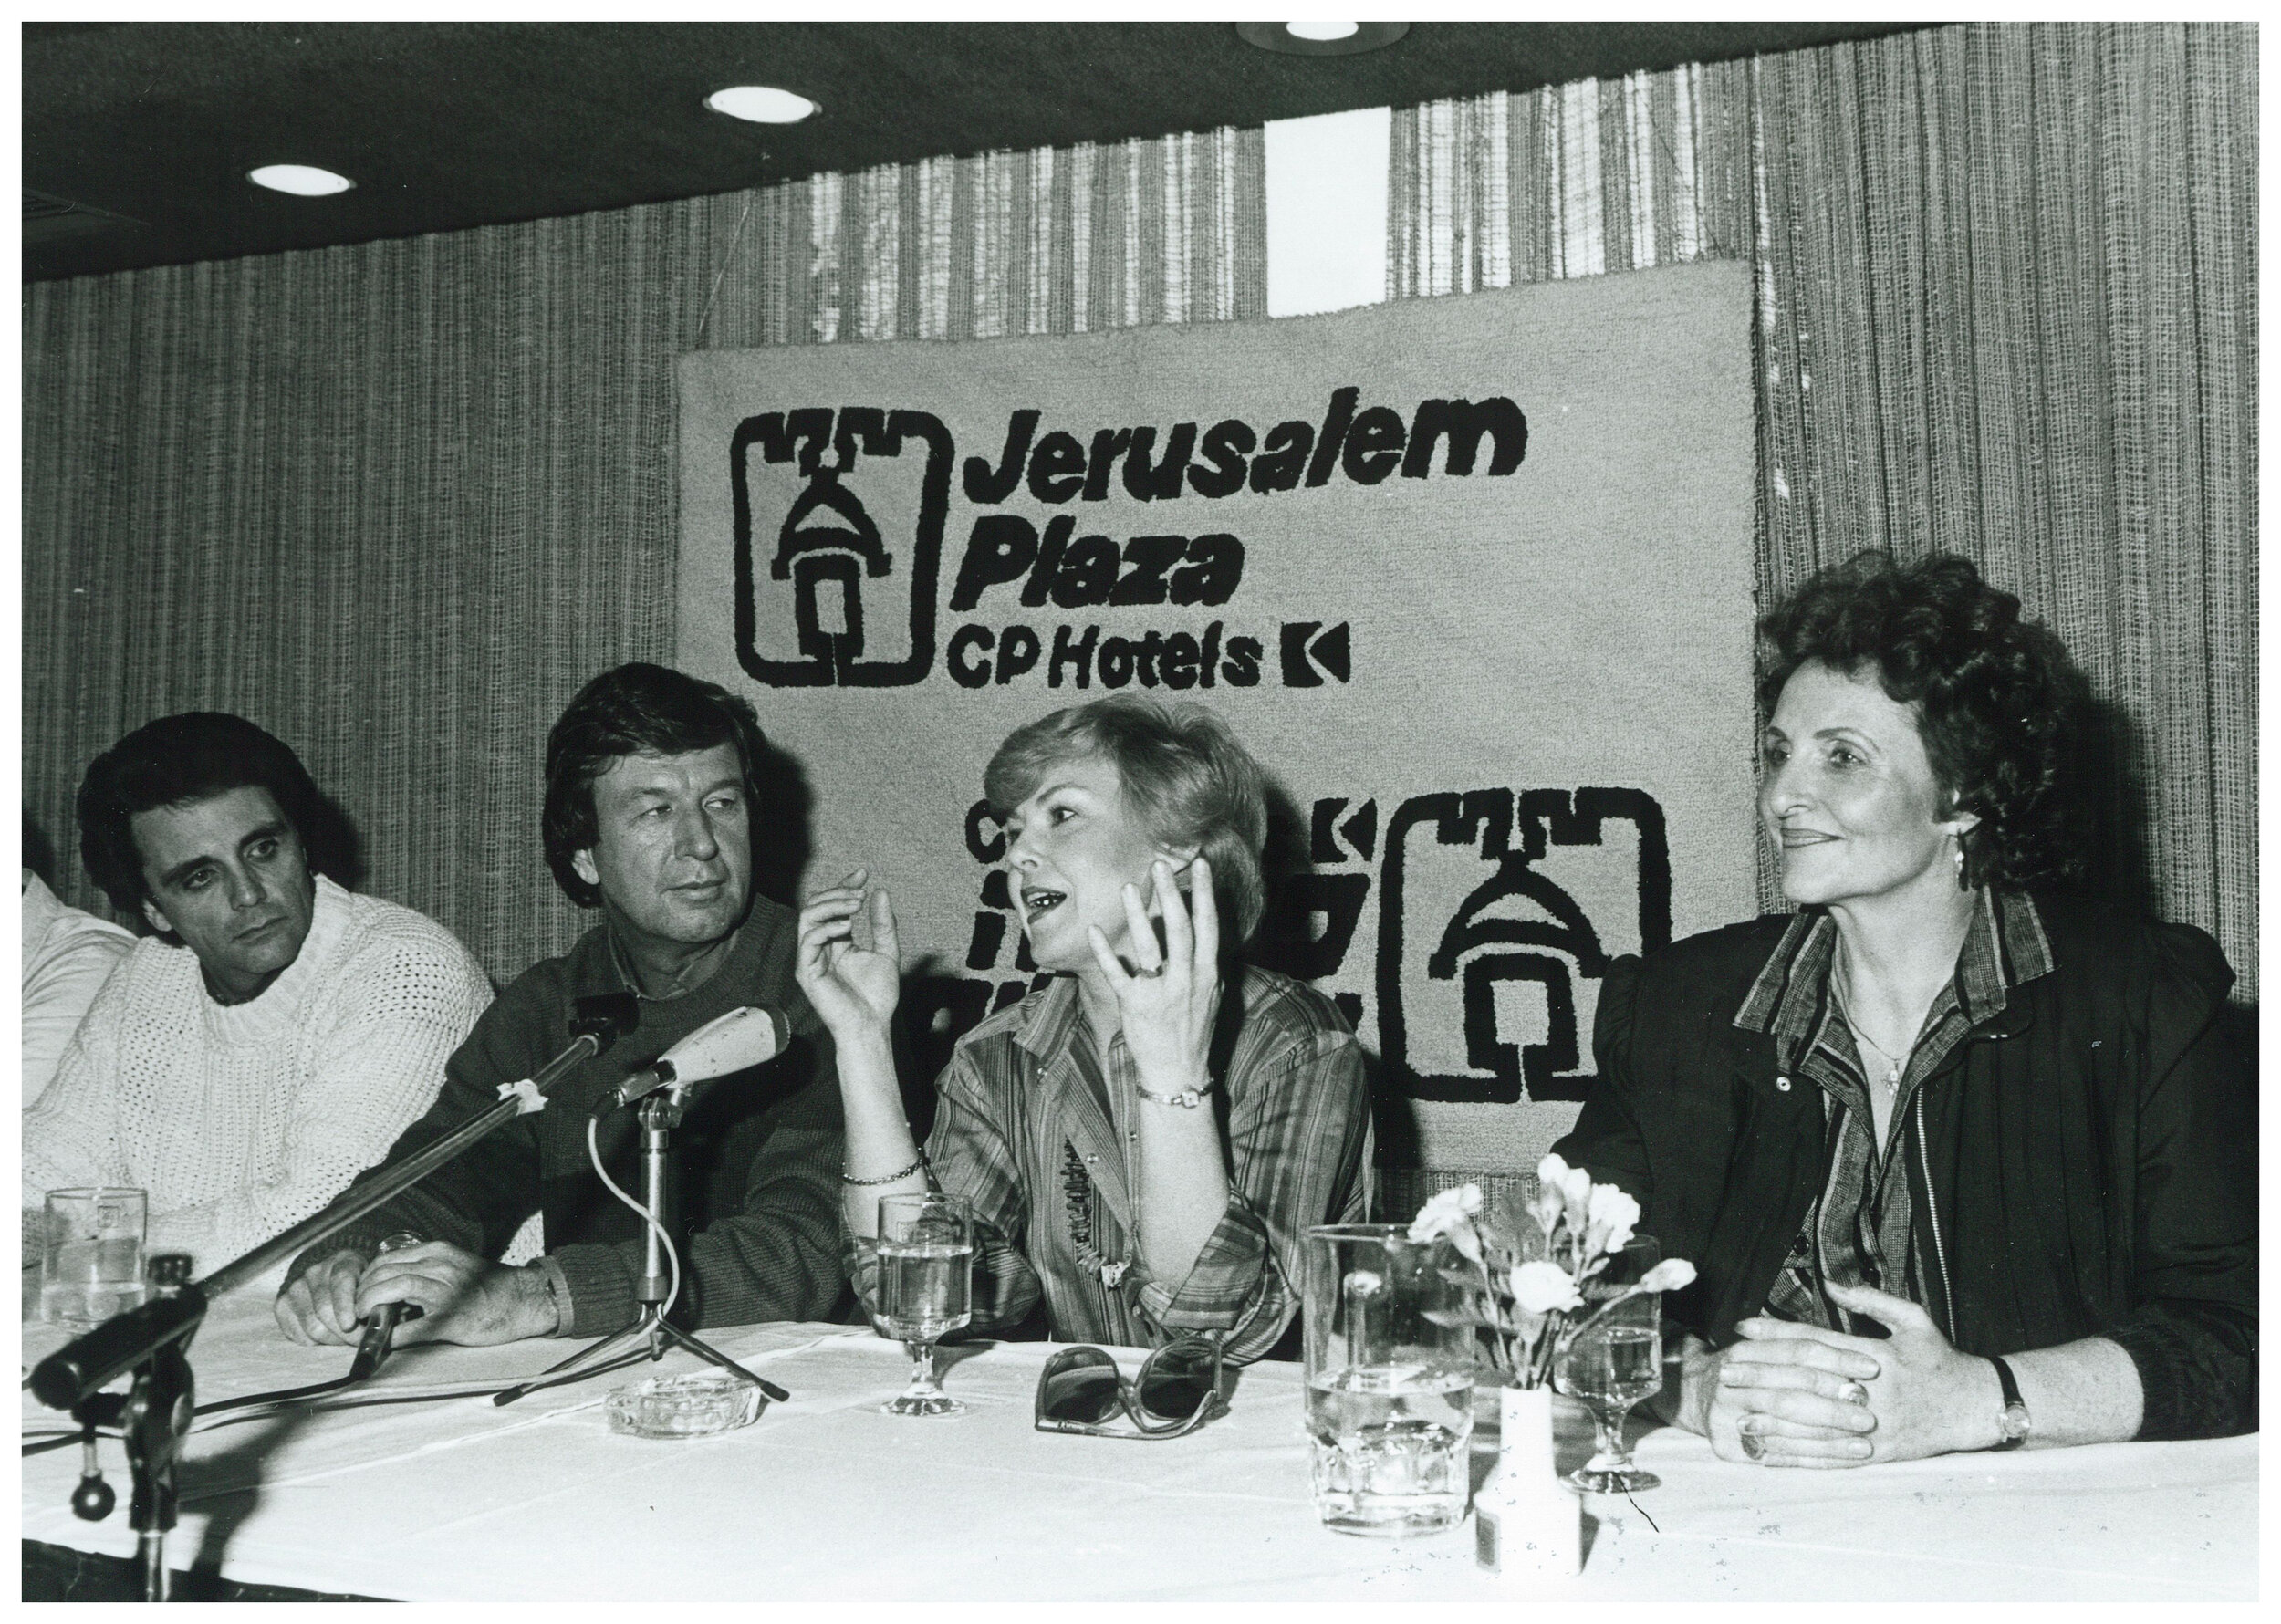  Press conference about Israel preformances in Israel that Polly Grimes (on right) promoted. 